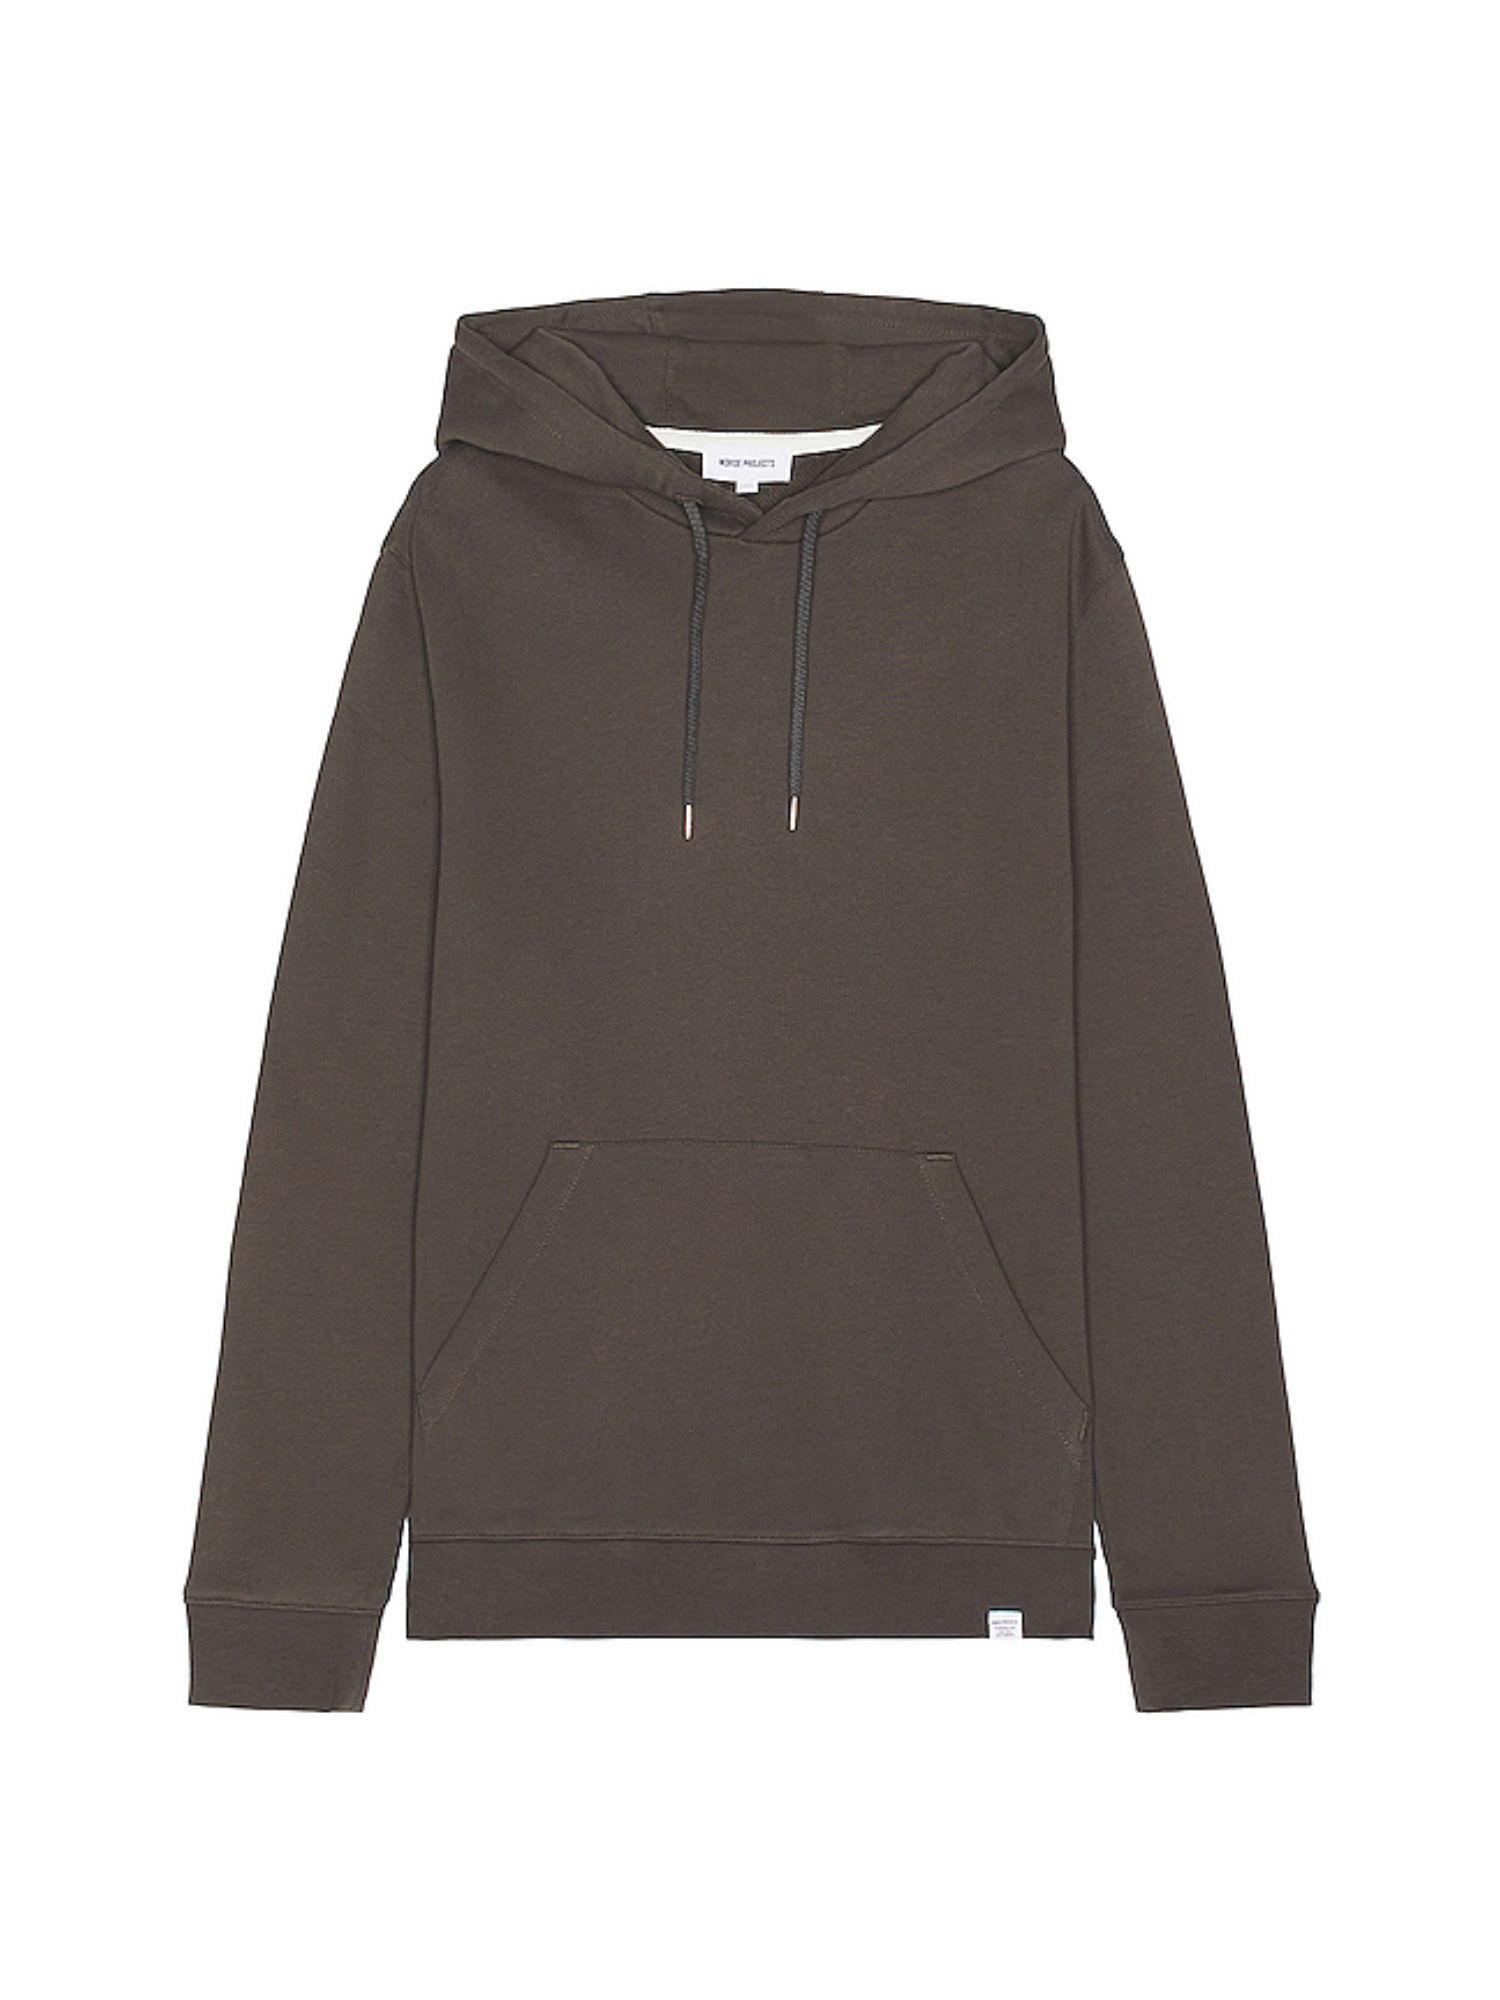 vagn classic hoodie